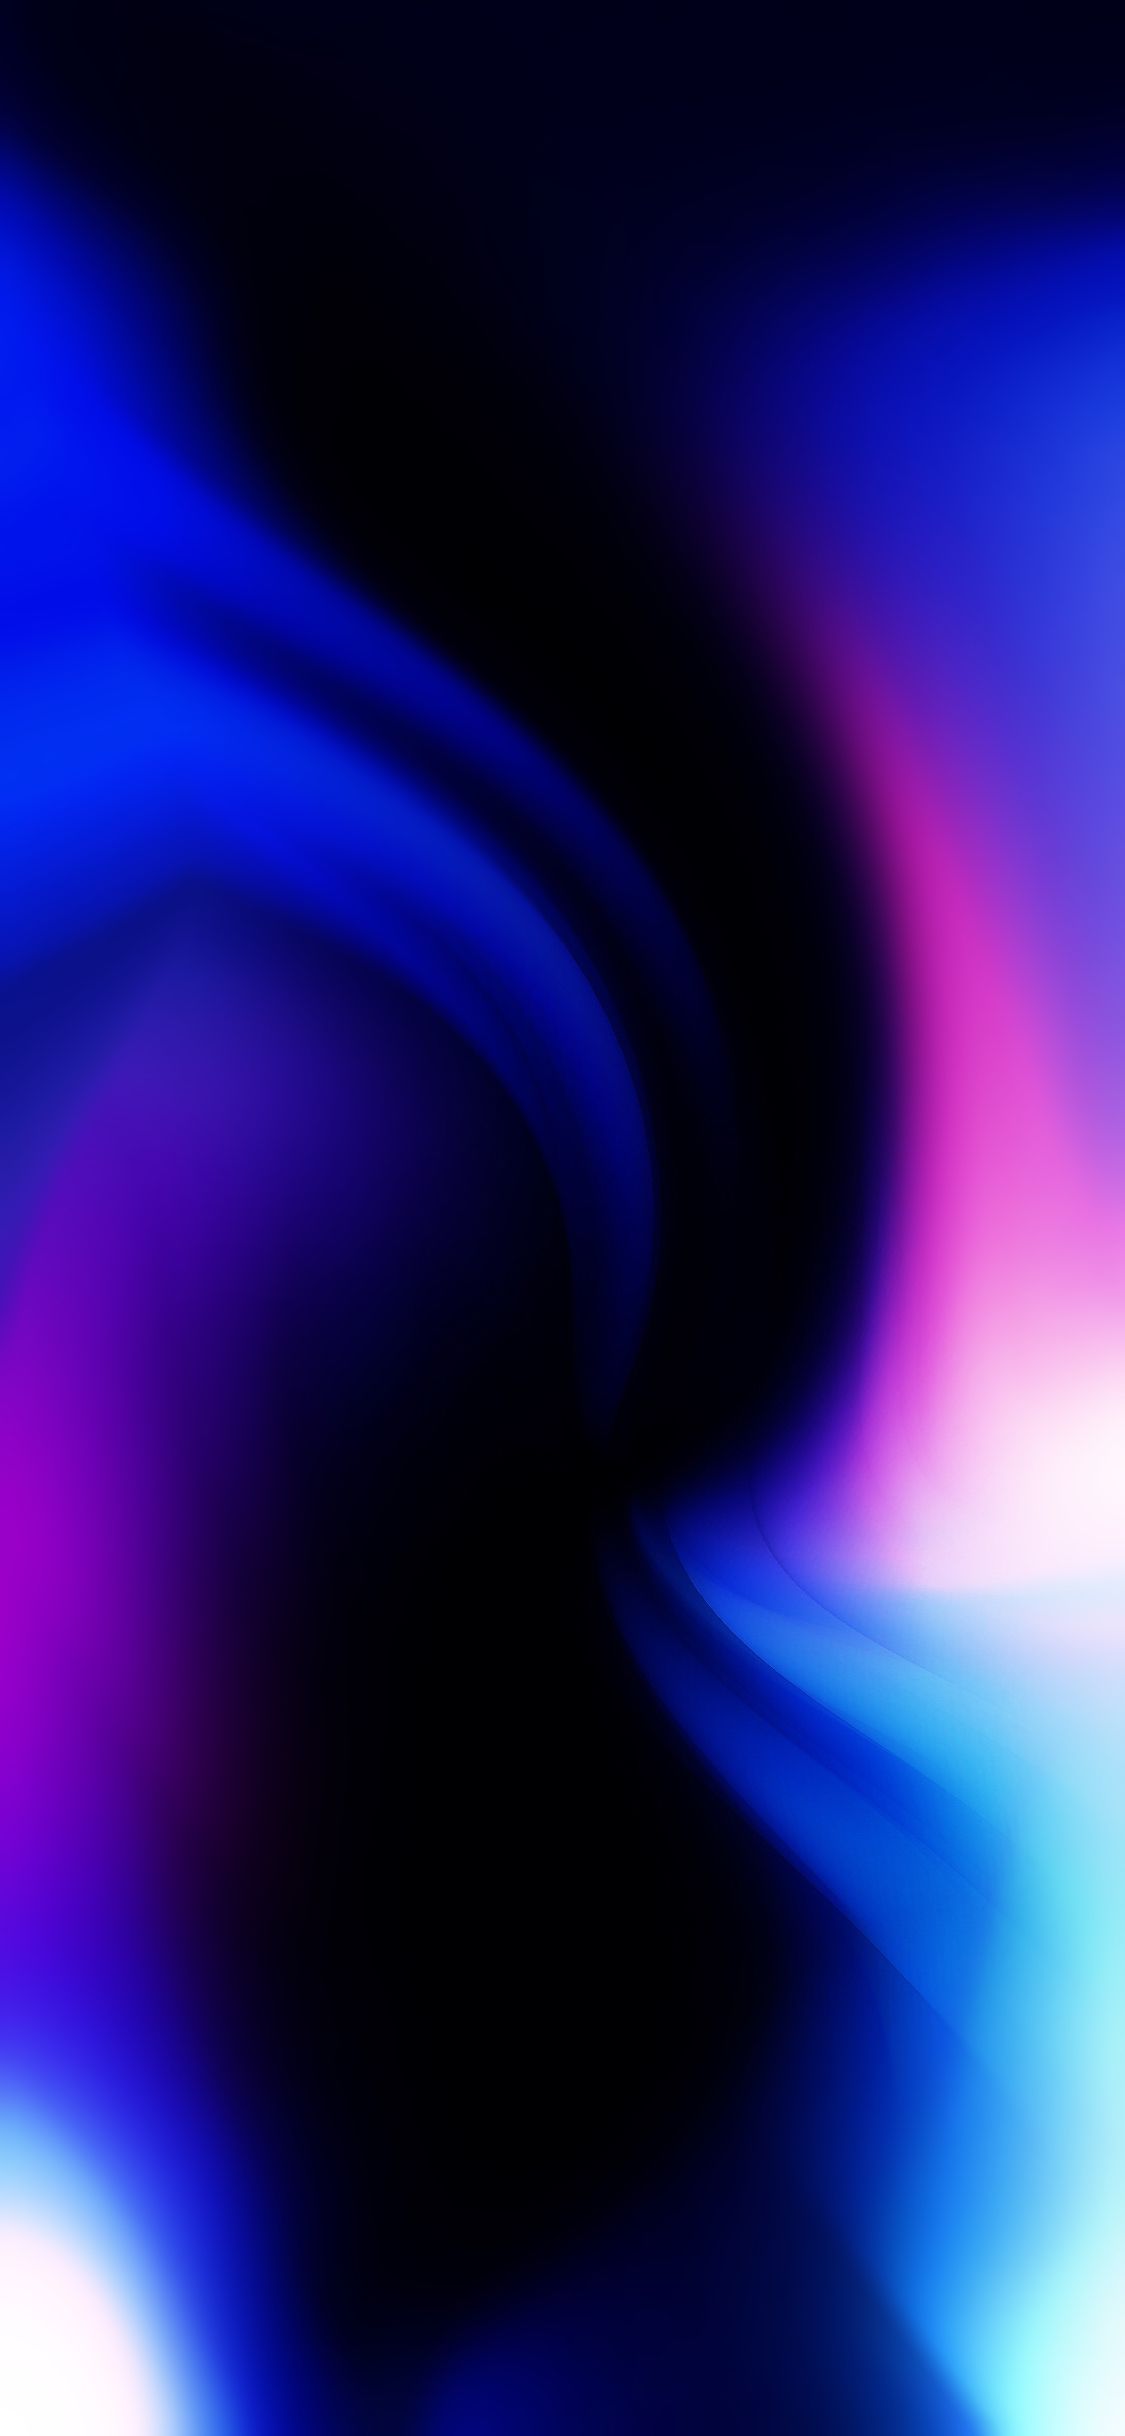 Colorful OLED Wallpapers - 4k, HD Colorful OLED Backgrounds on WallpaperBat